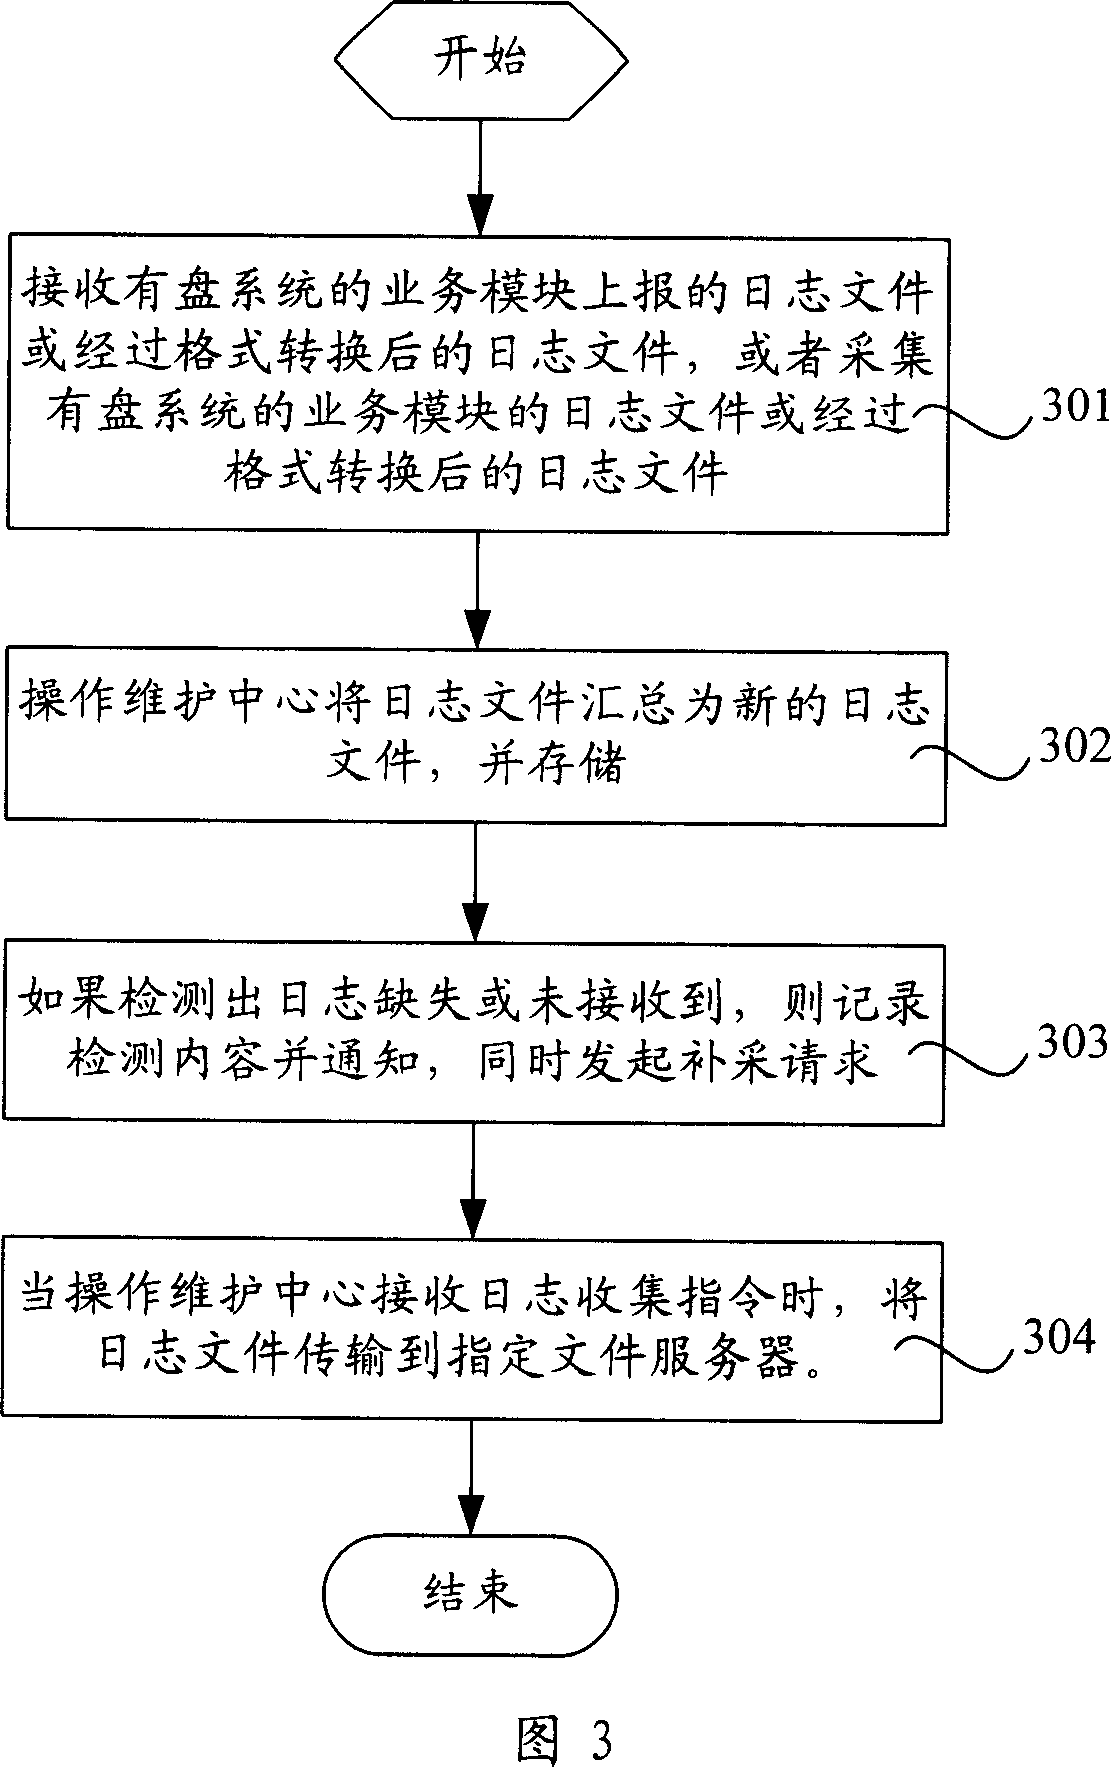 Distributed system journal collecting method and system